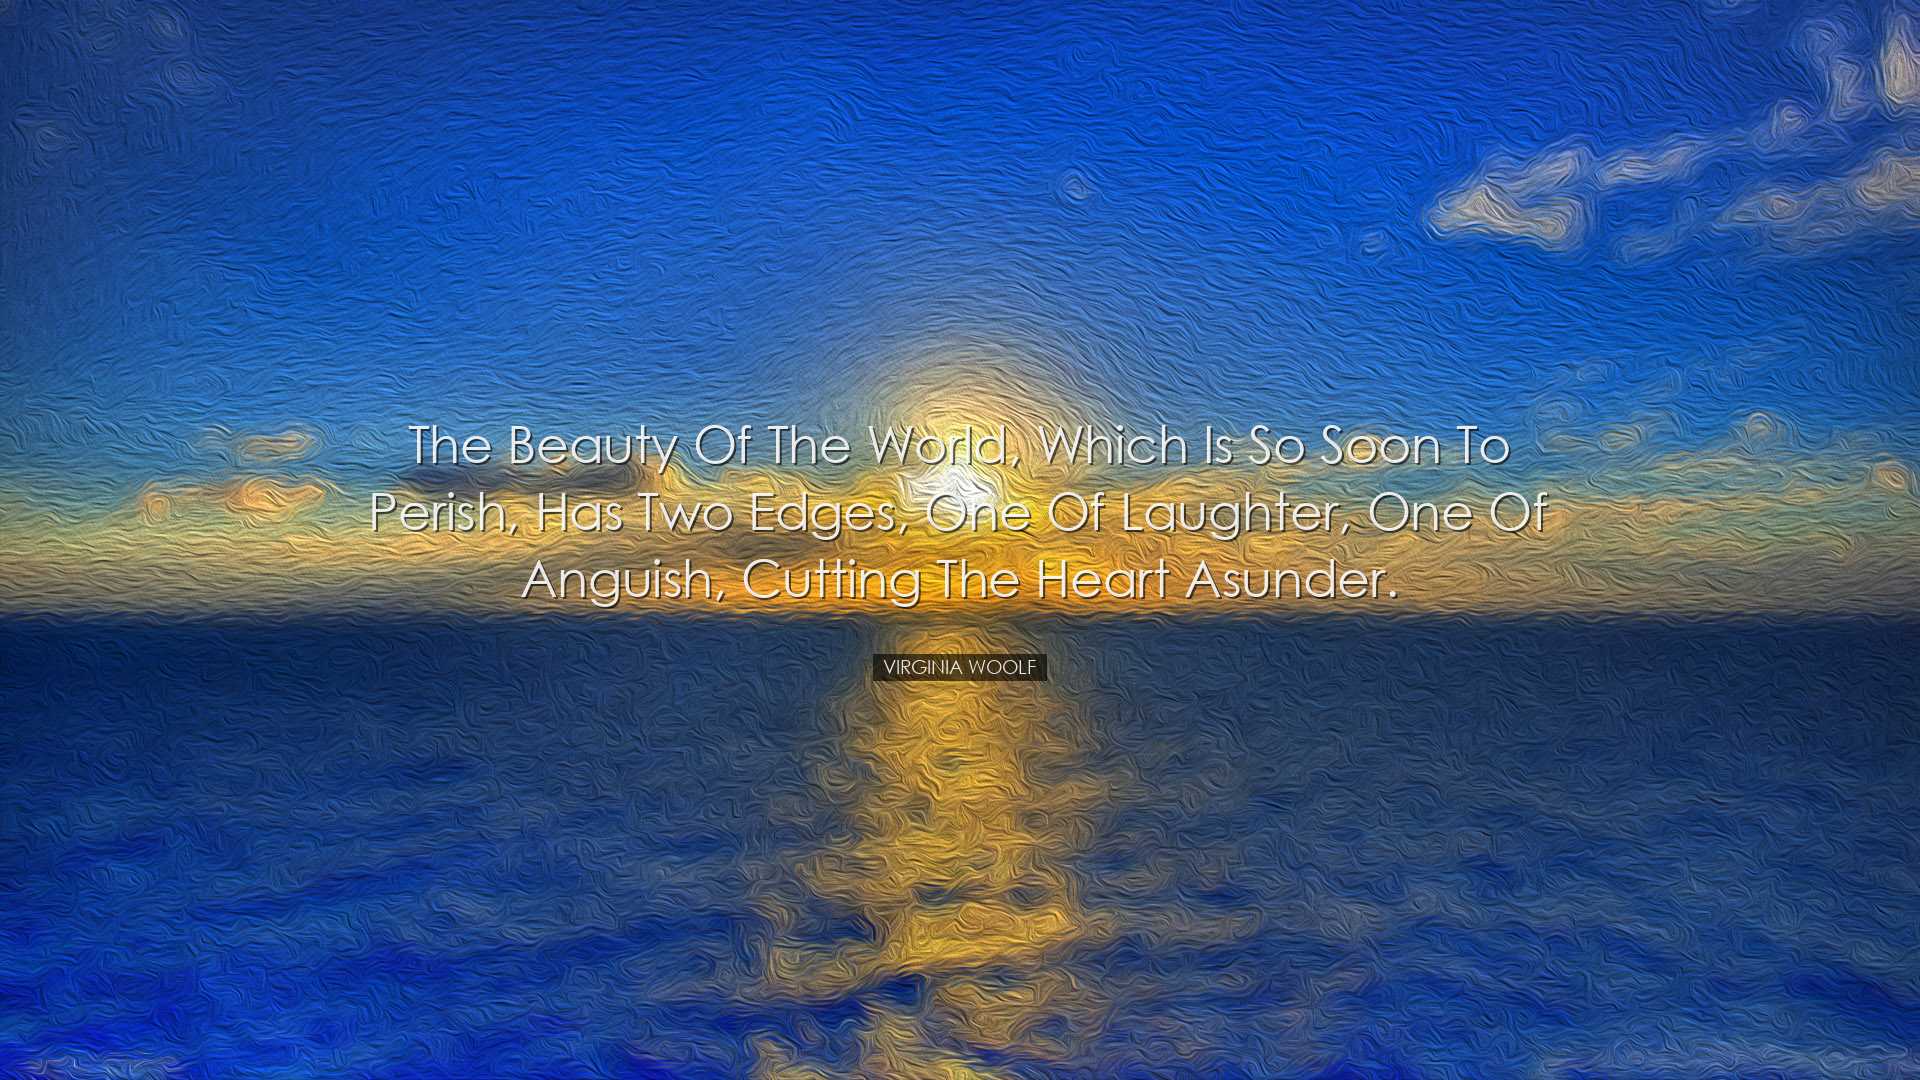 The beauty of the world, which is so soon to perish, has two edges